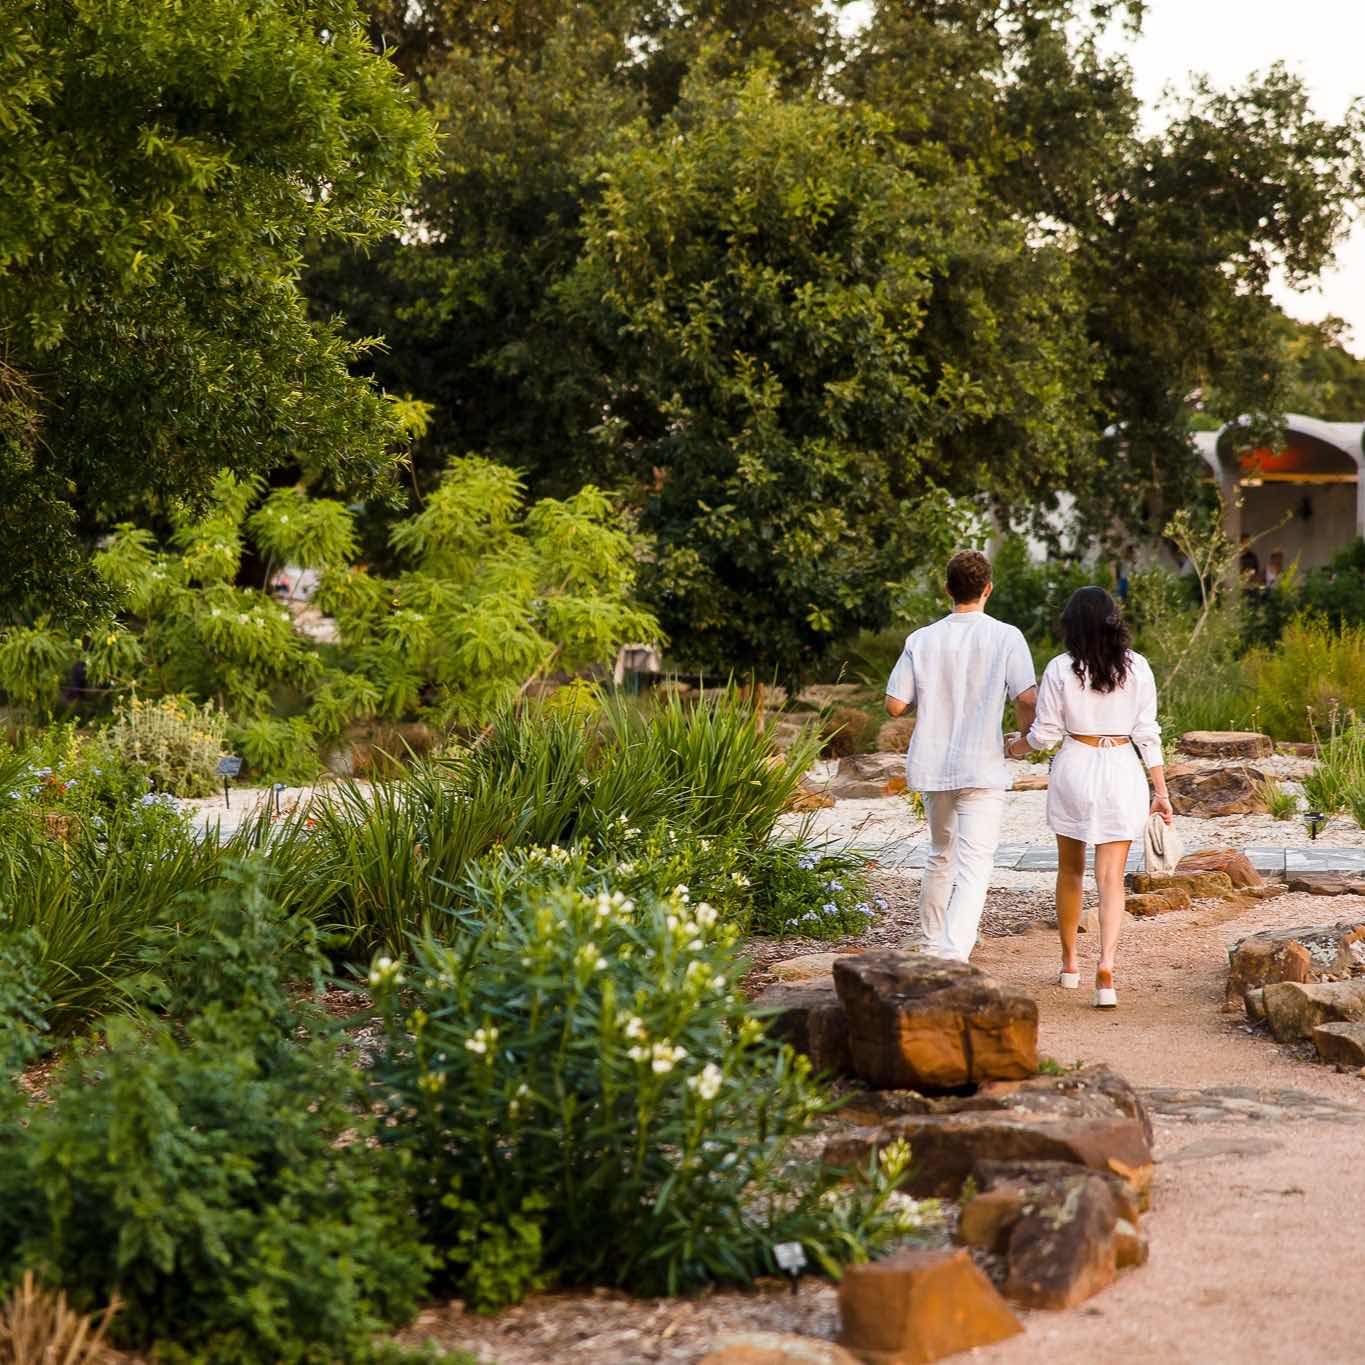 Visitors walk down a path at the Garden.